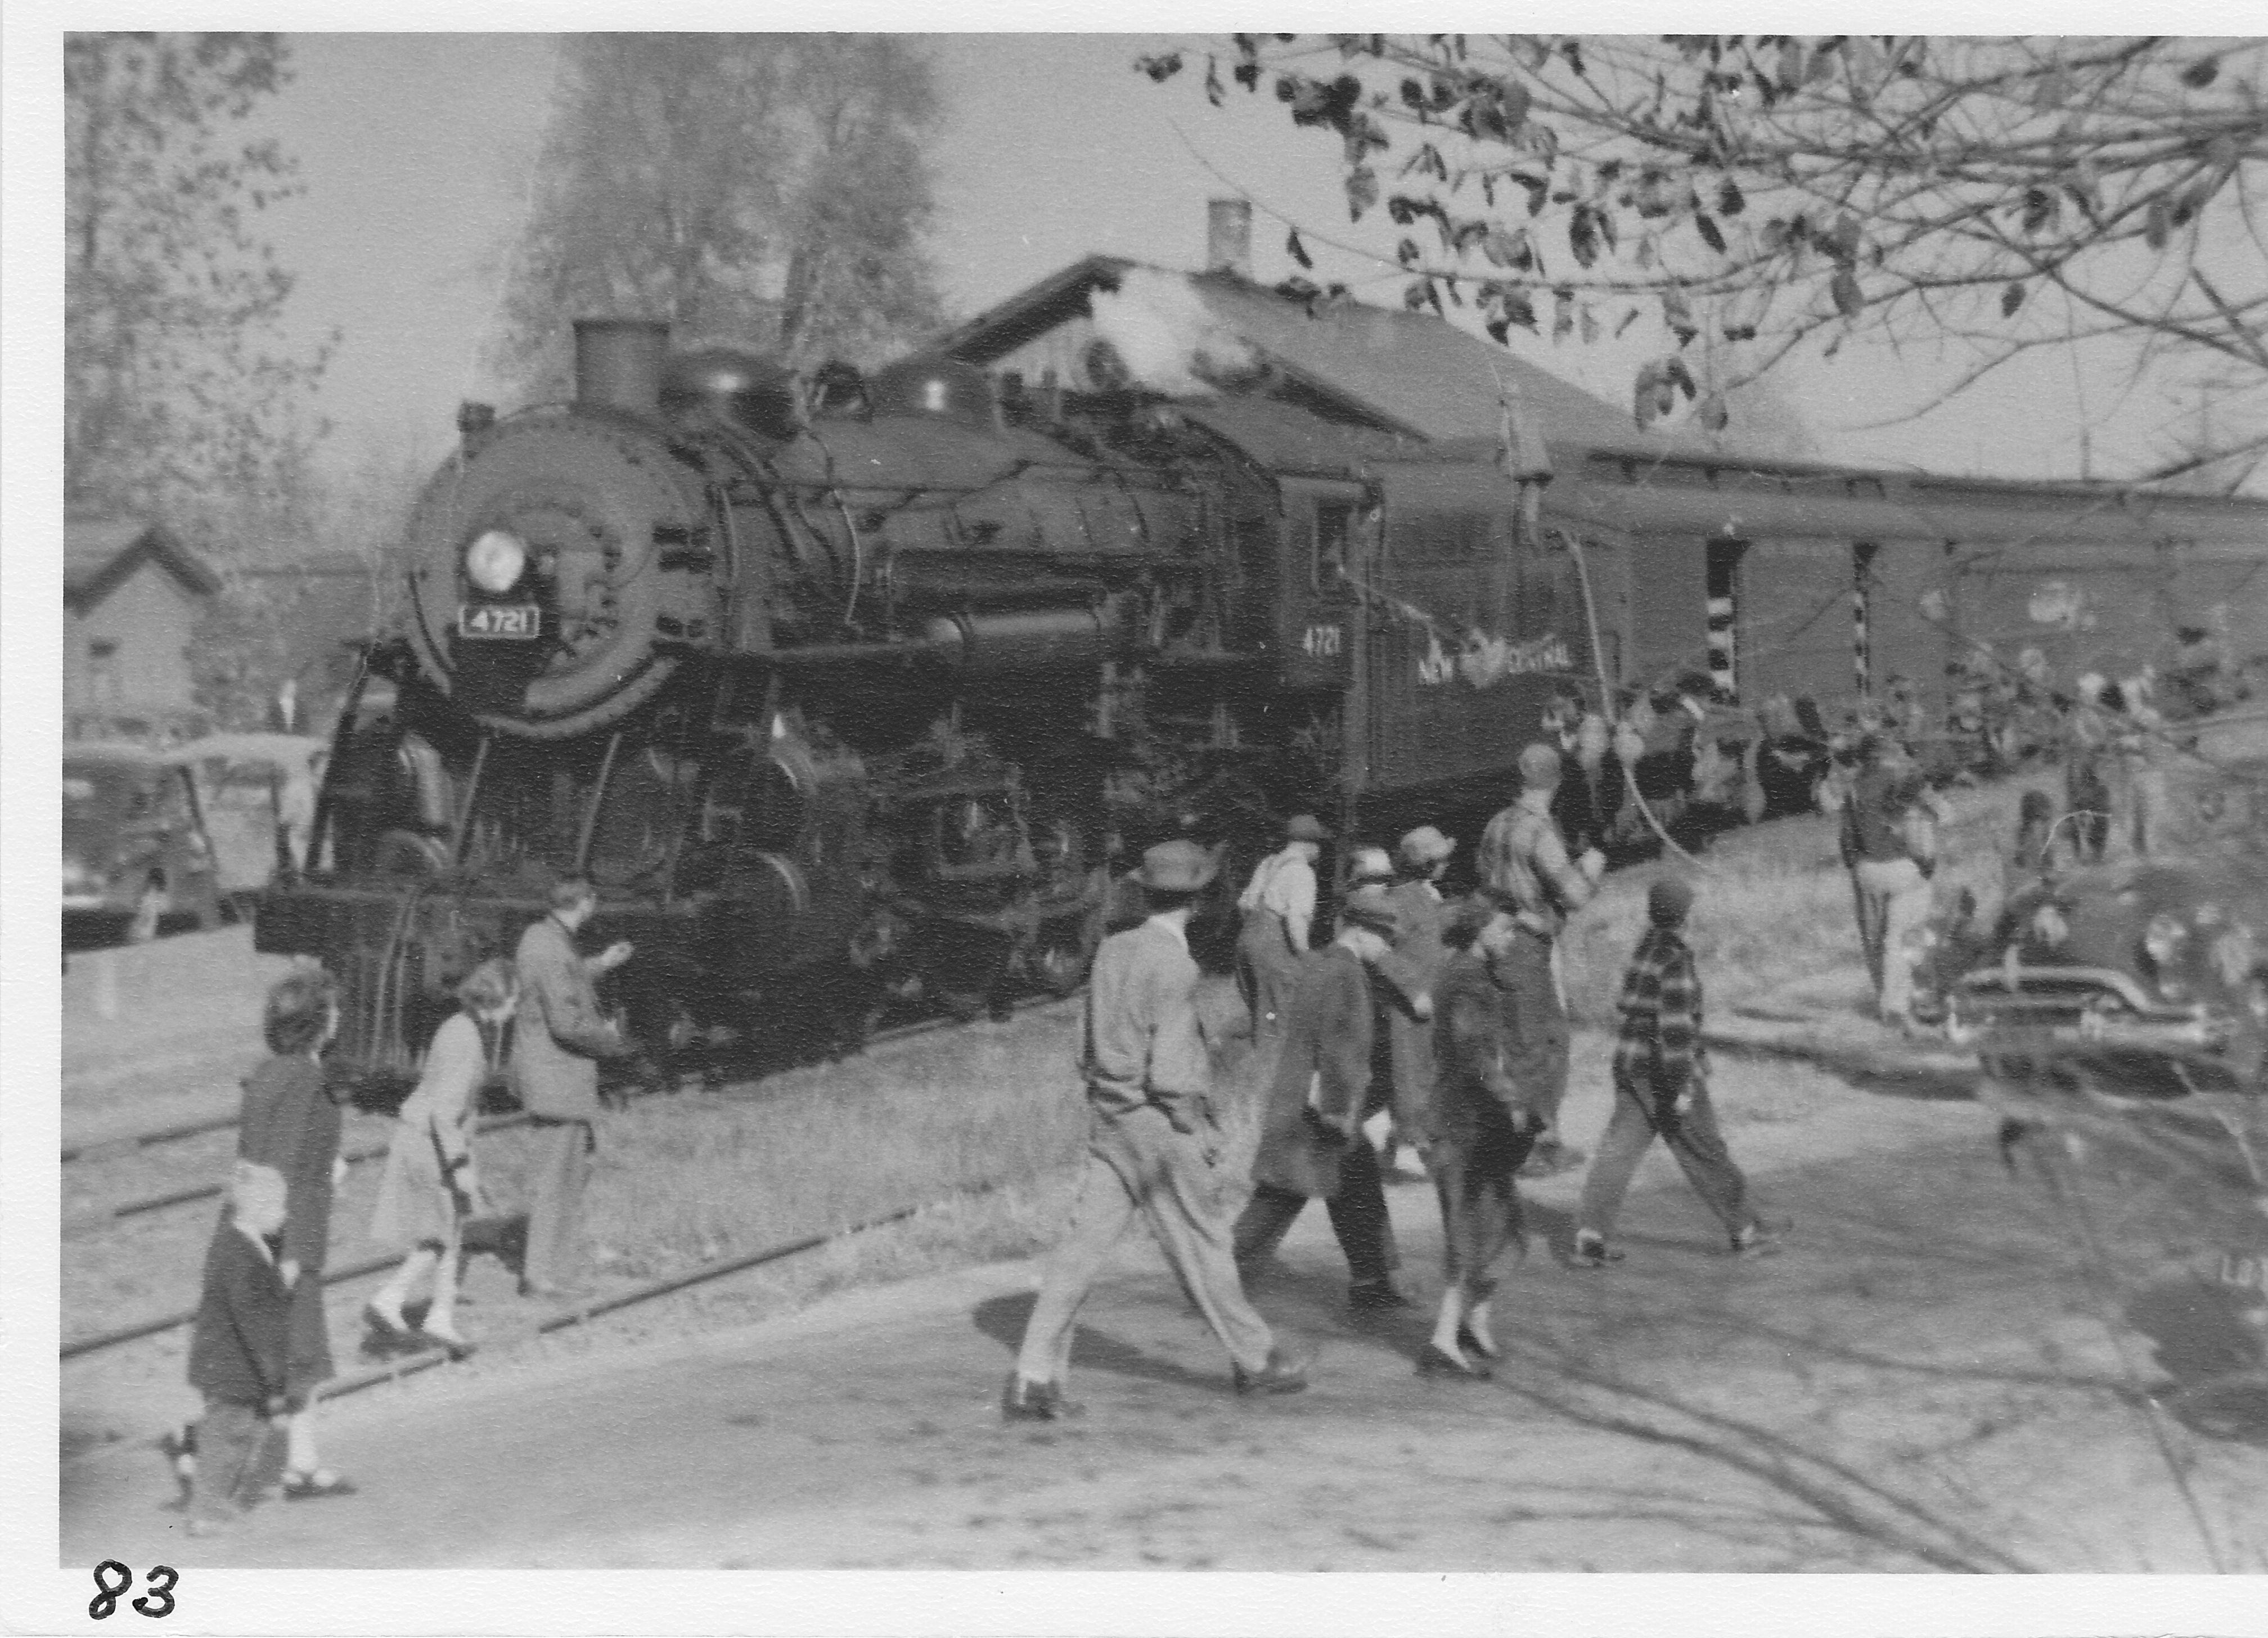 An excursion on New York Central Railroad, one of last runs before freight service ended. Passenger service to Morenci ended in 1938.